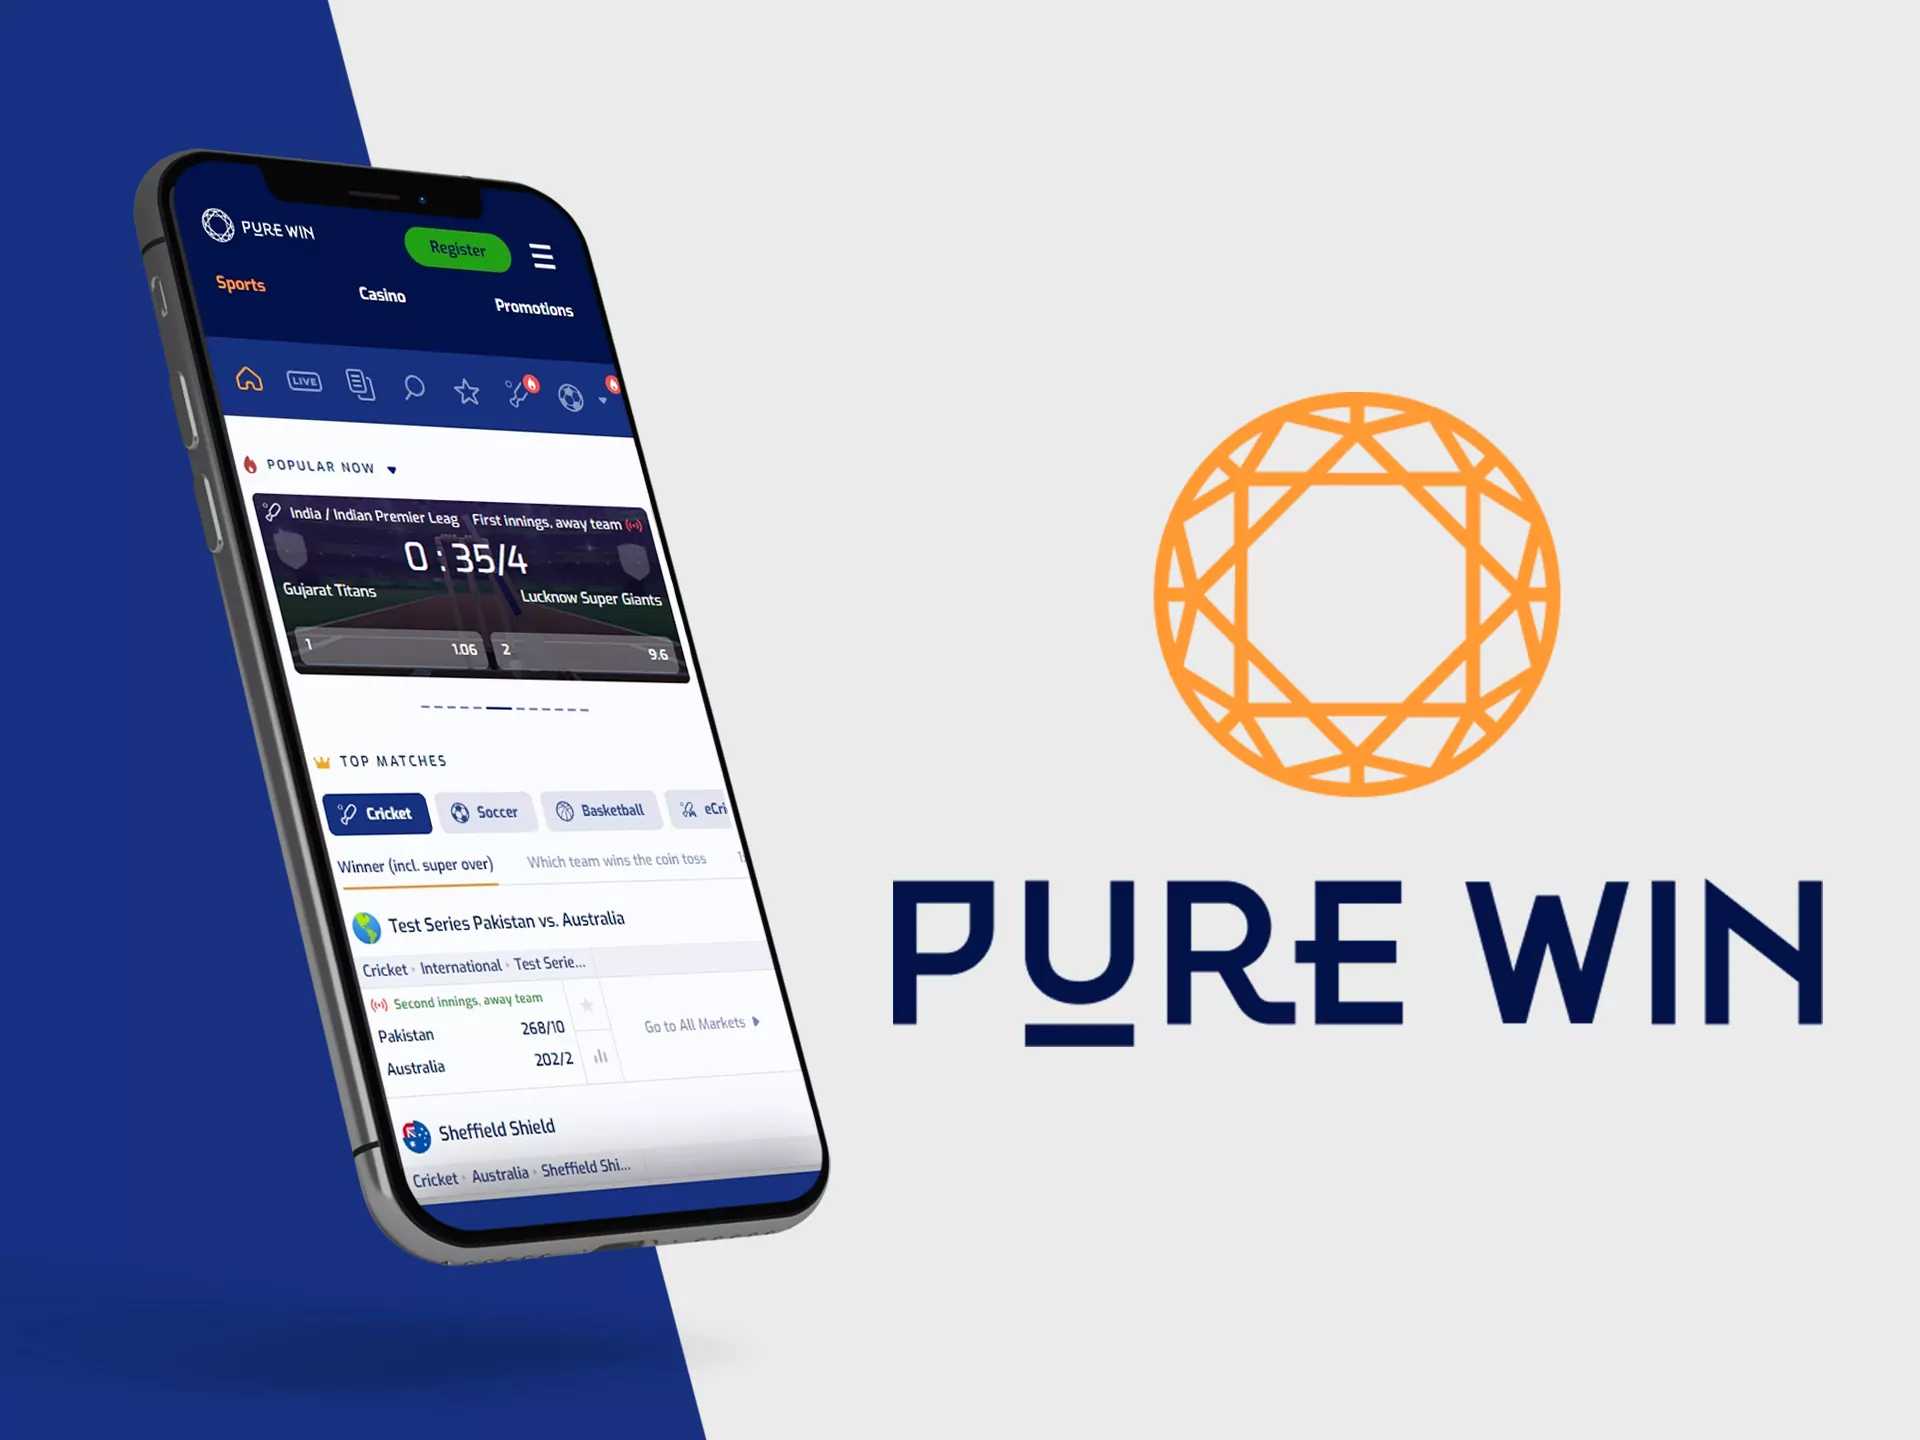 Pure Win online betting and casino app in Bangladesh.